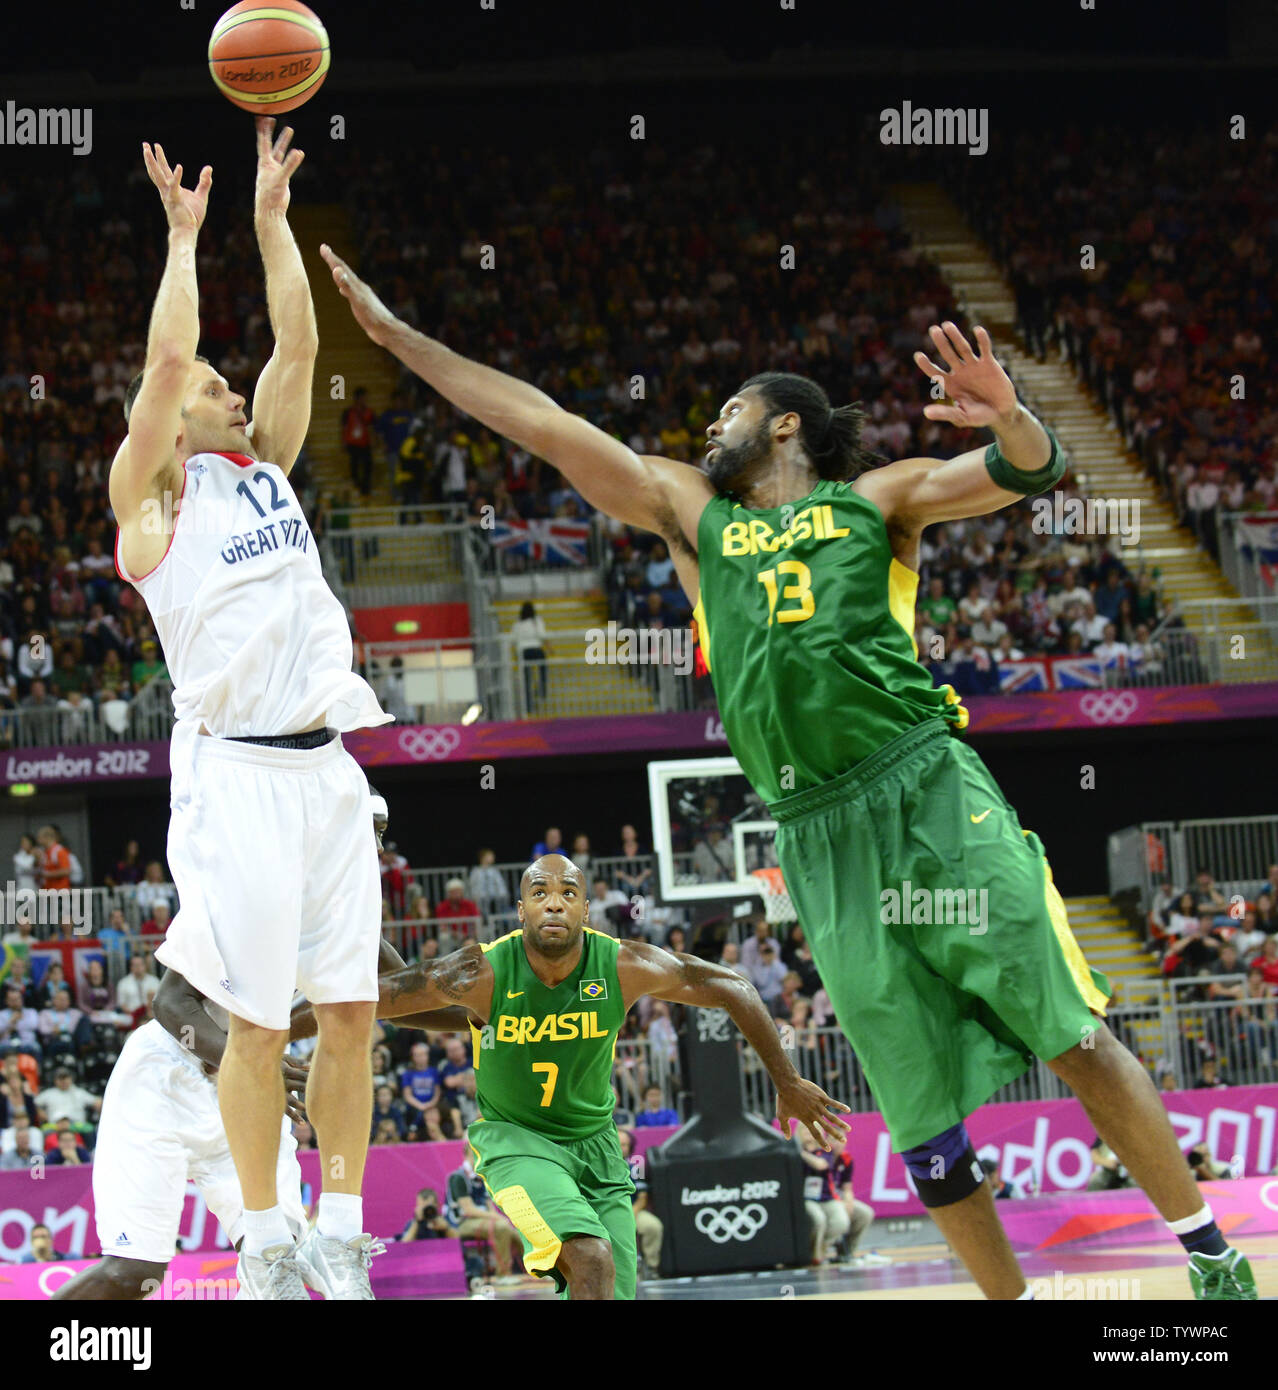 Guard Nate Reinking (12) of Great Britain shoots over center Nene Hilario (13) of Brazil in second half action in a preliminary round - group B basketball game at the London 2012 Summer Olympics on July 31, 2012 in London. Brazil won the game 67 - 62.  UPI/Ron Sachs Stock Photo